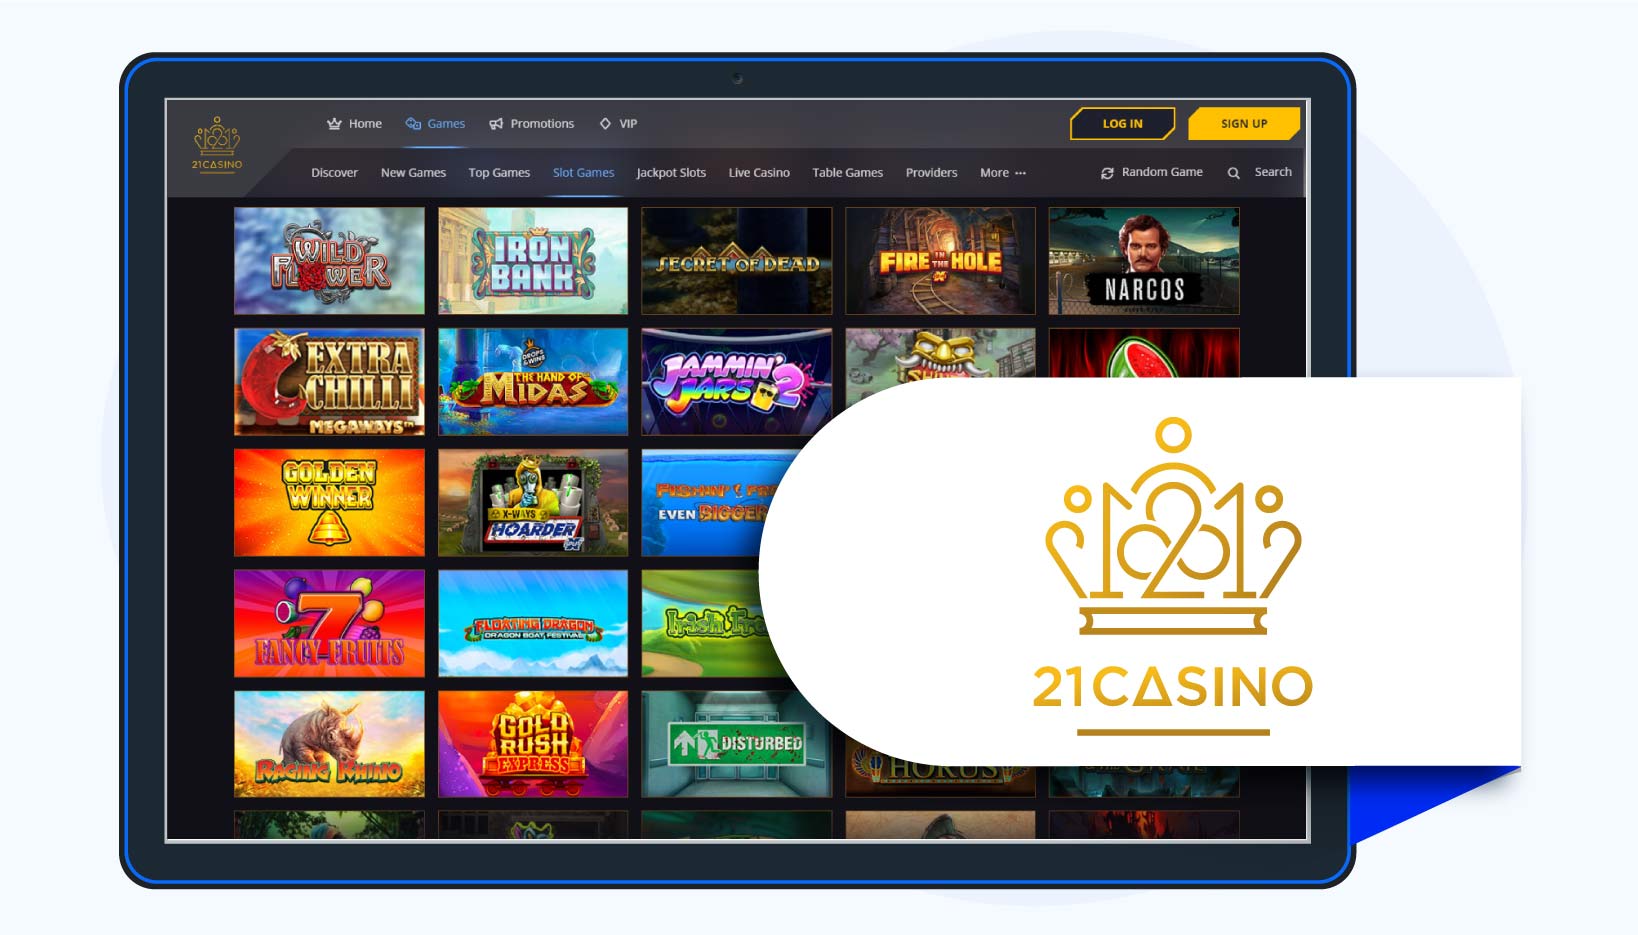 50 free spins on Narcos at 21Casino